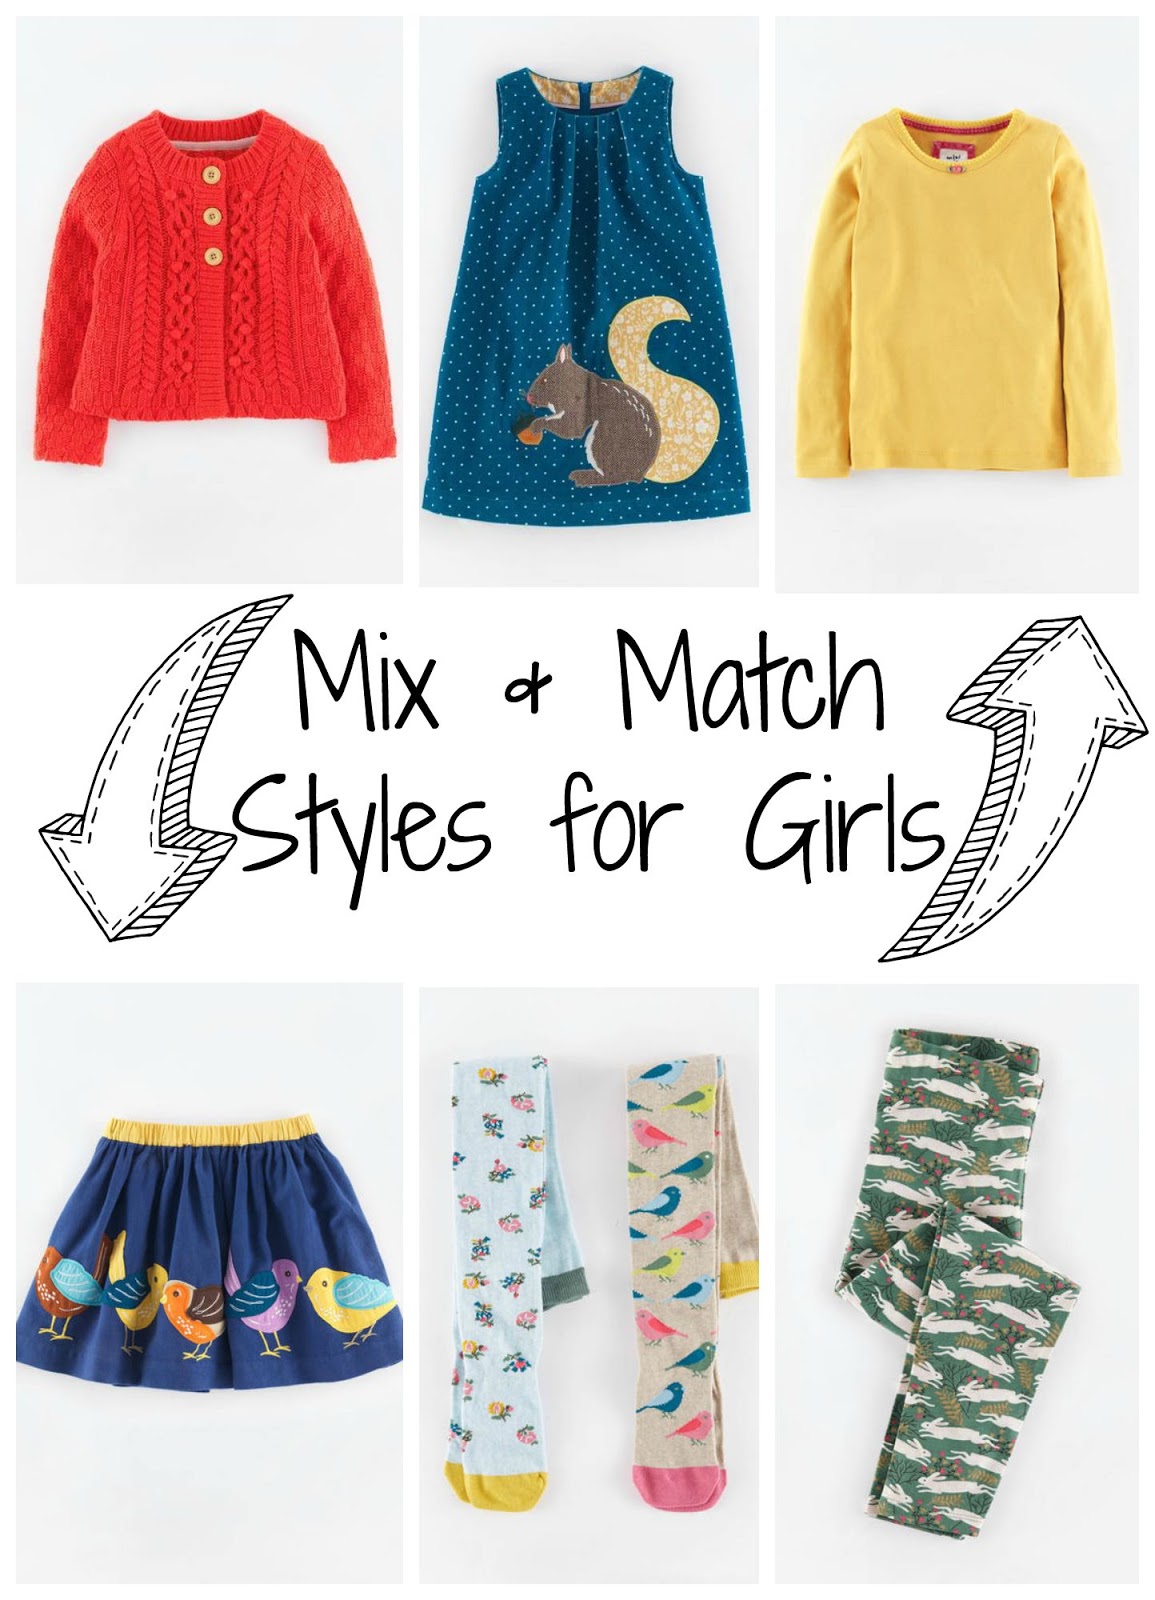 Mince ekstremt tvetydig Our Favorite Mix & Match School Styles for Boys & Girls - The Chirping Moms